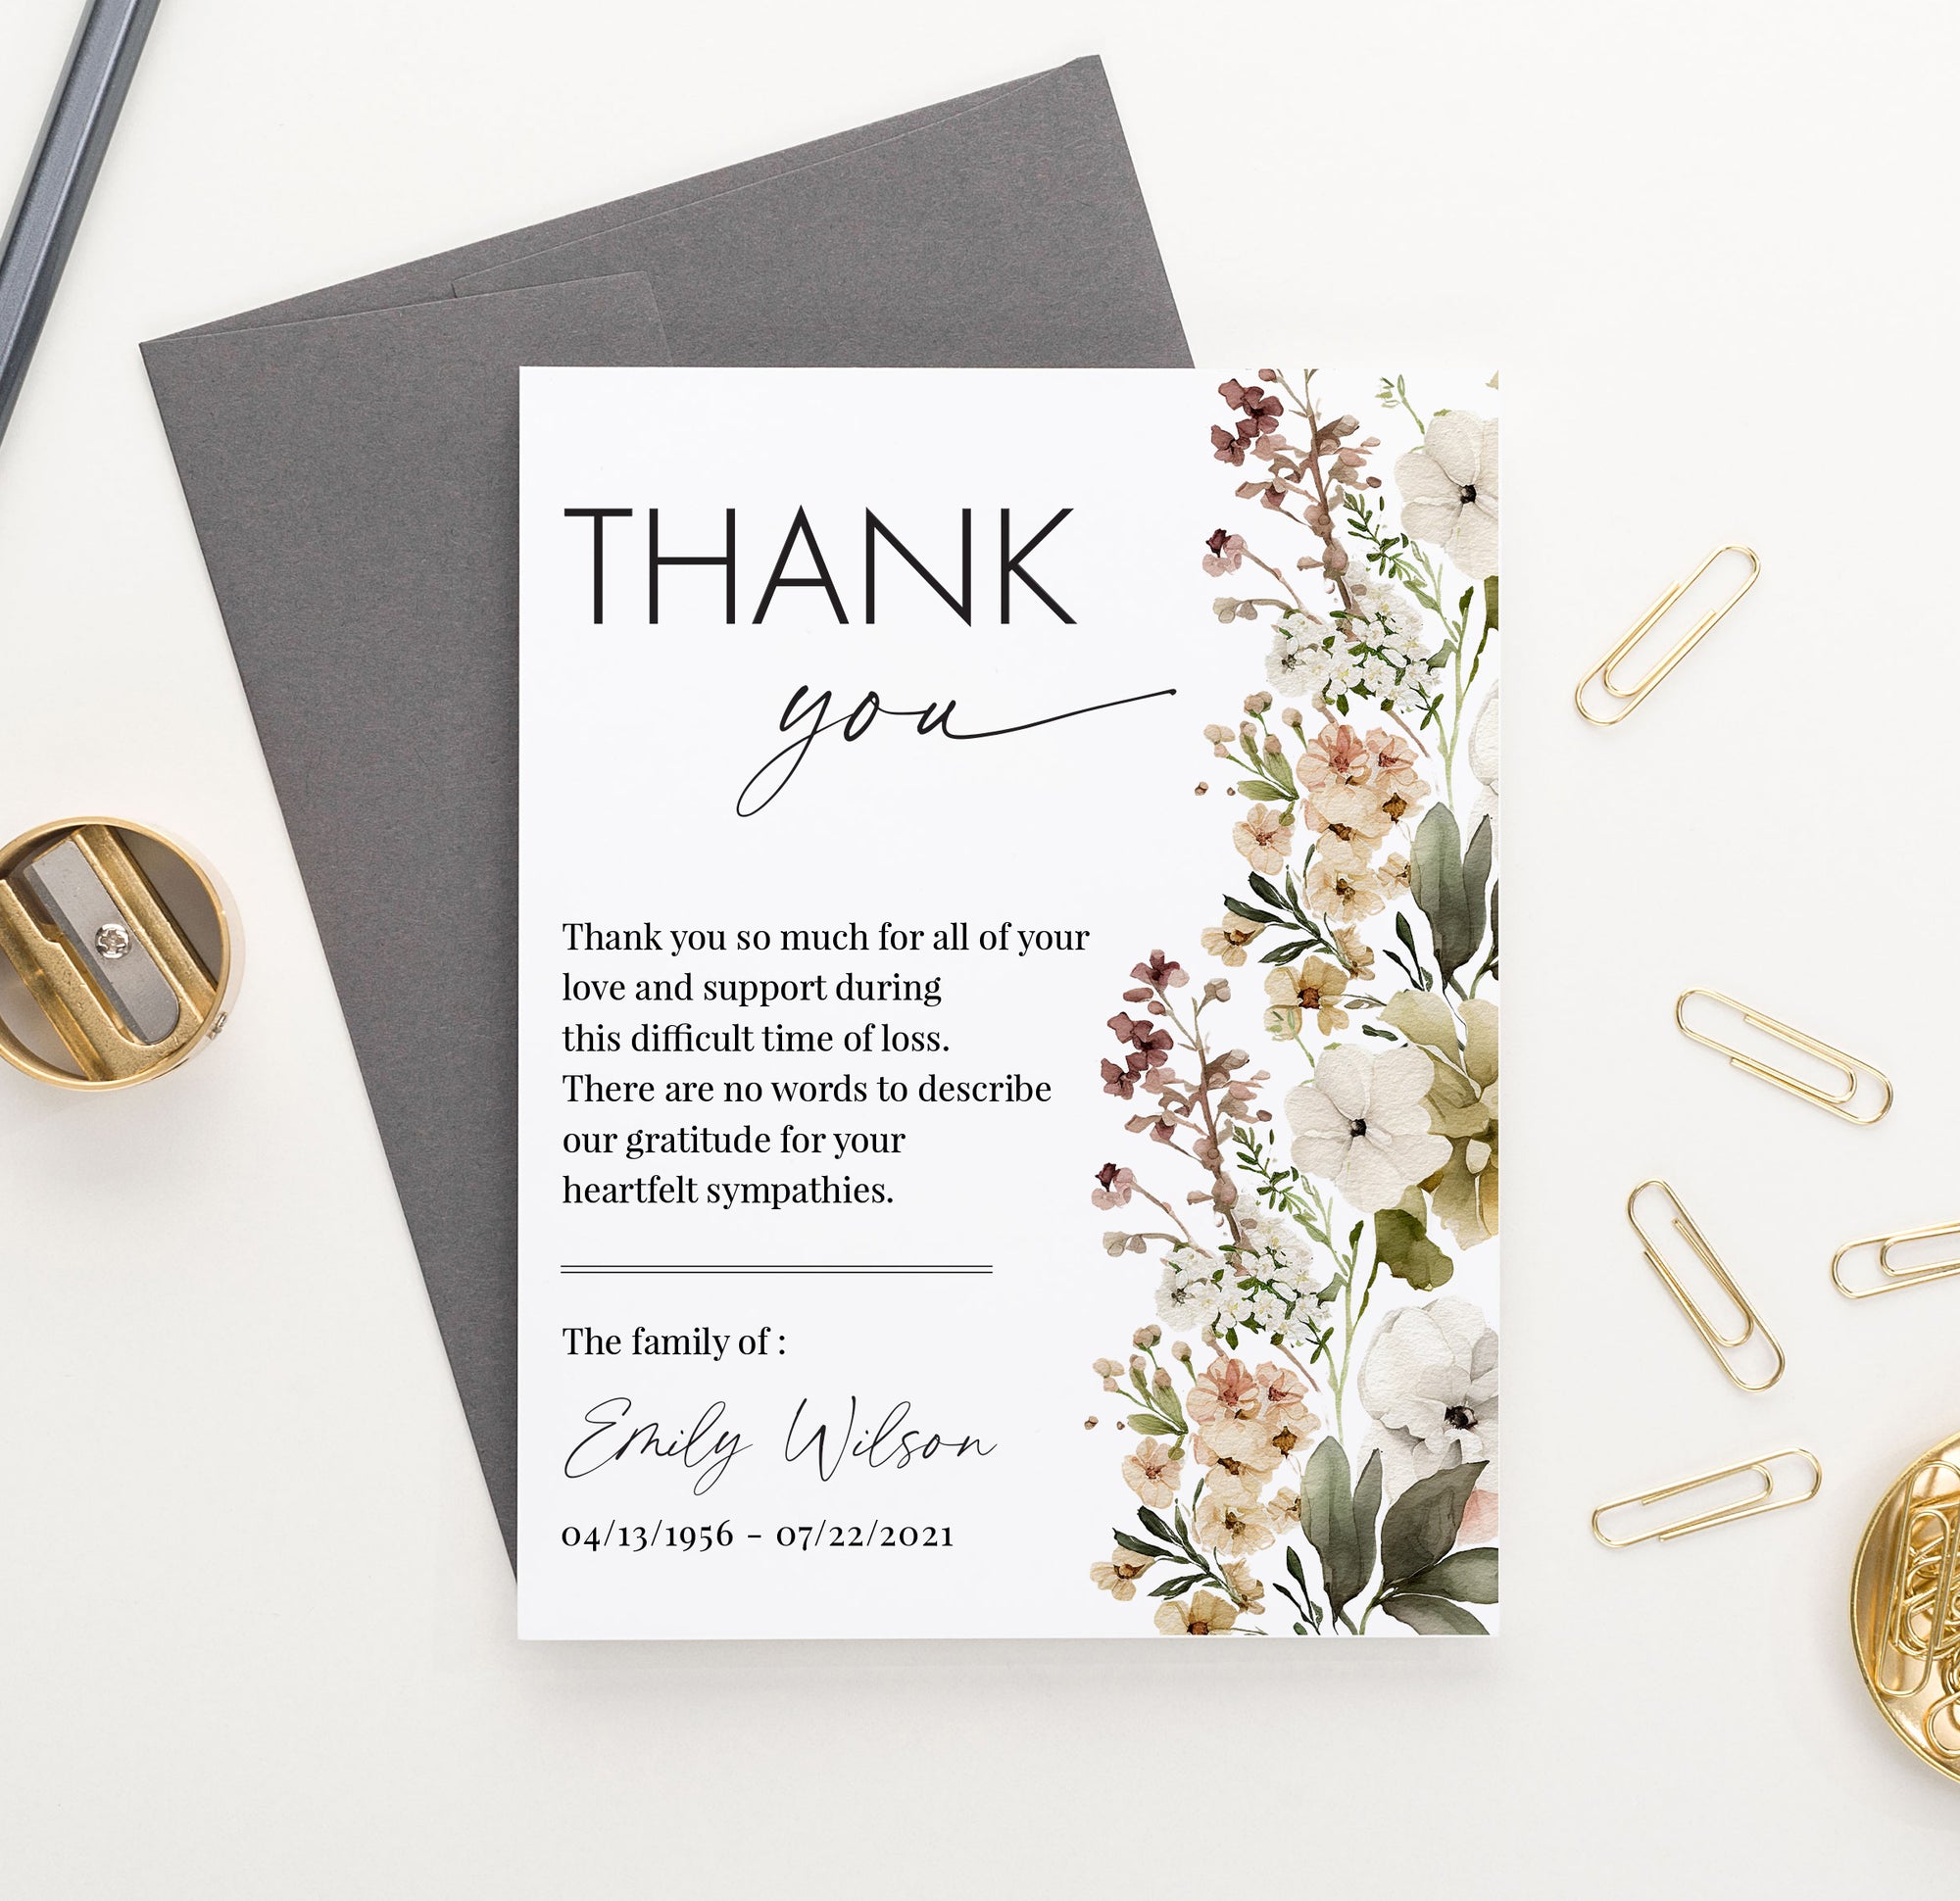 Minimalist Personalized Sympathy Thank You Cards With Stylish Florals